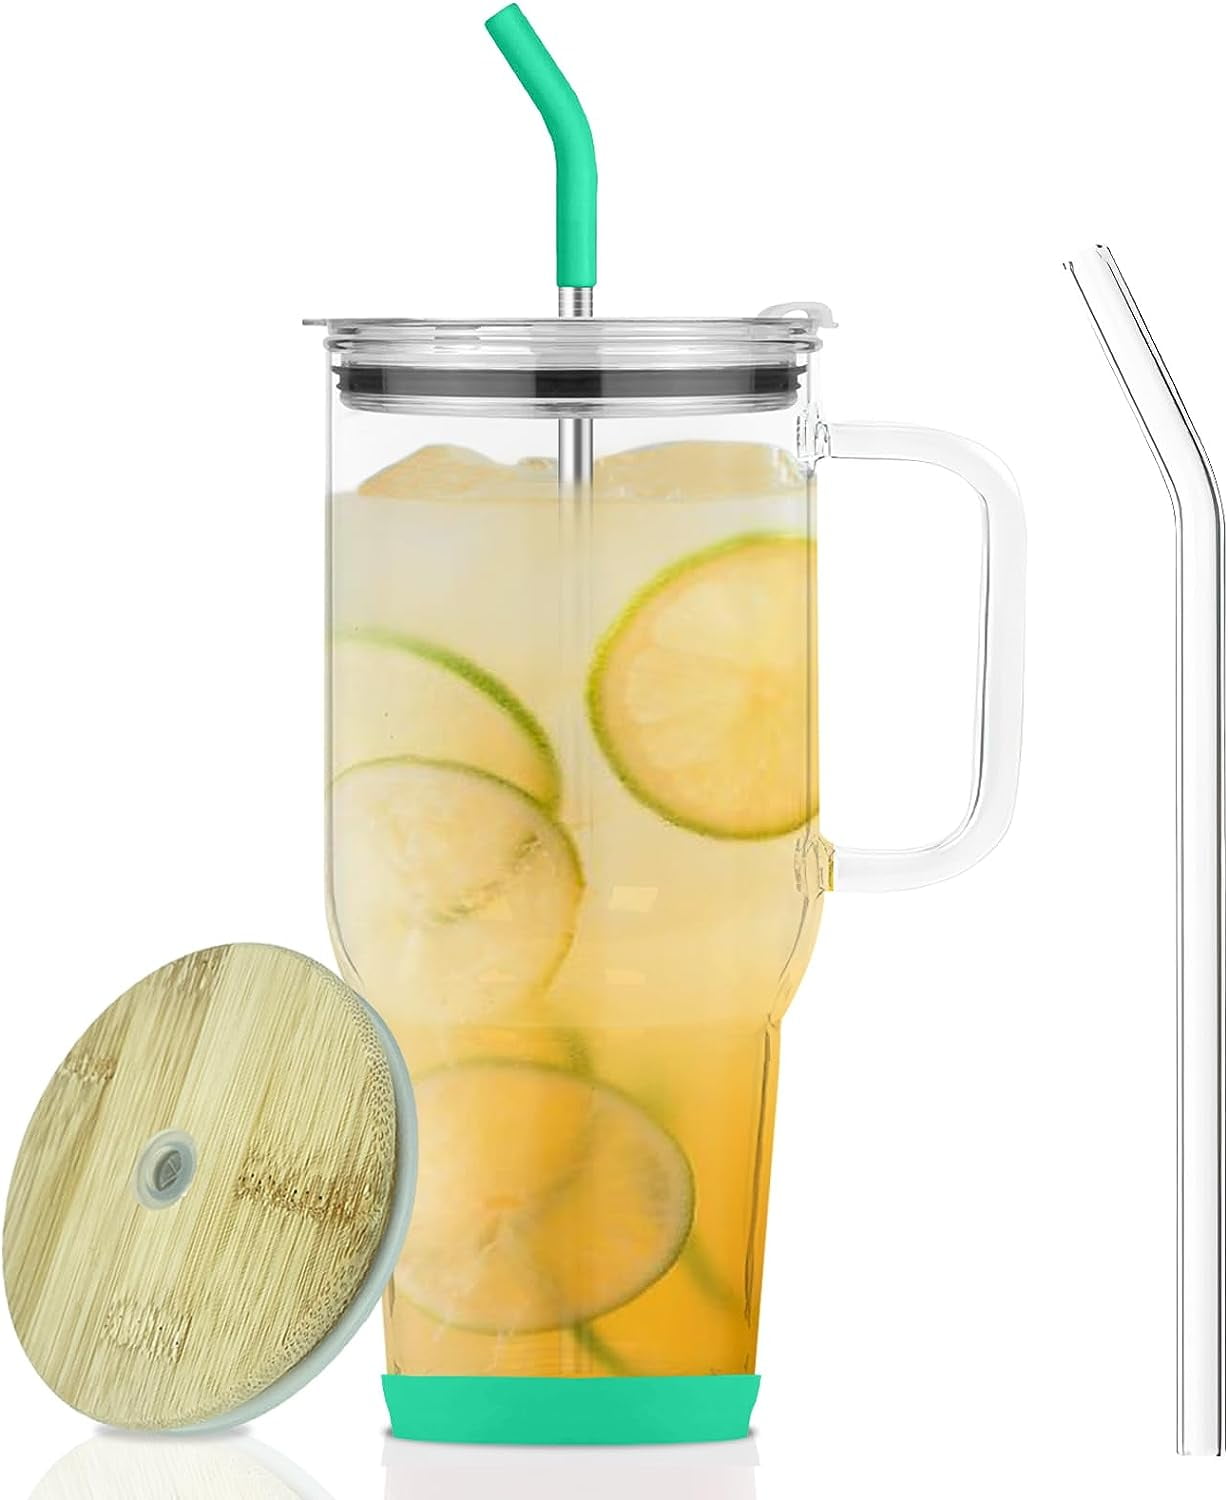 Promotional 32 oz Glass Tumbler with Handle and Straw $13.81